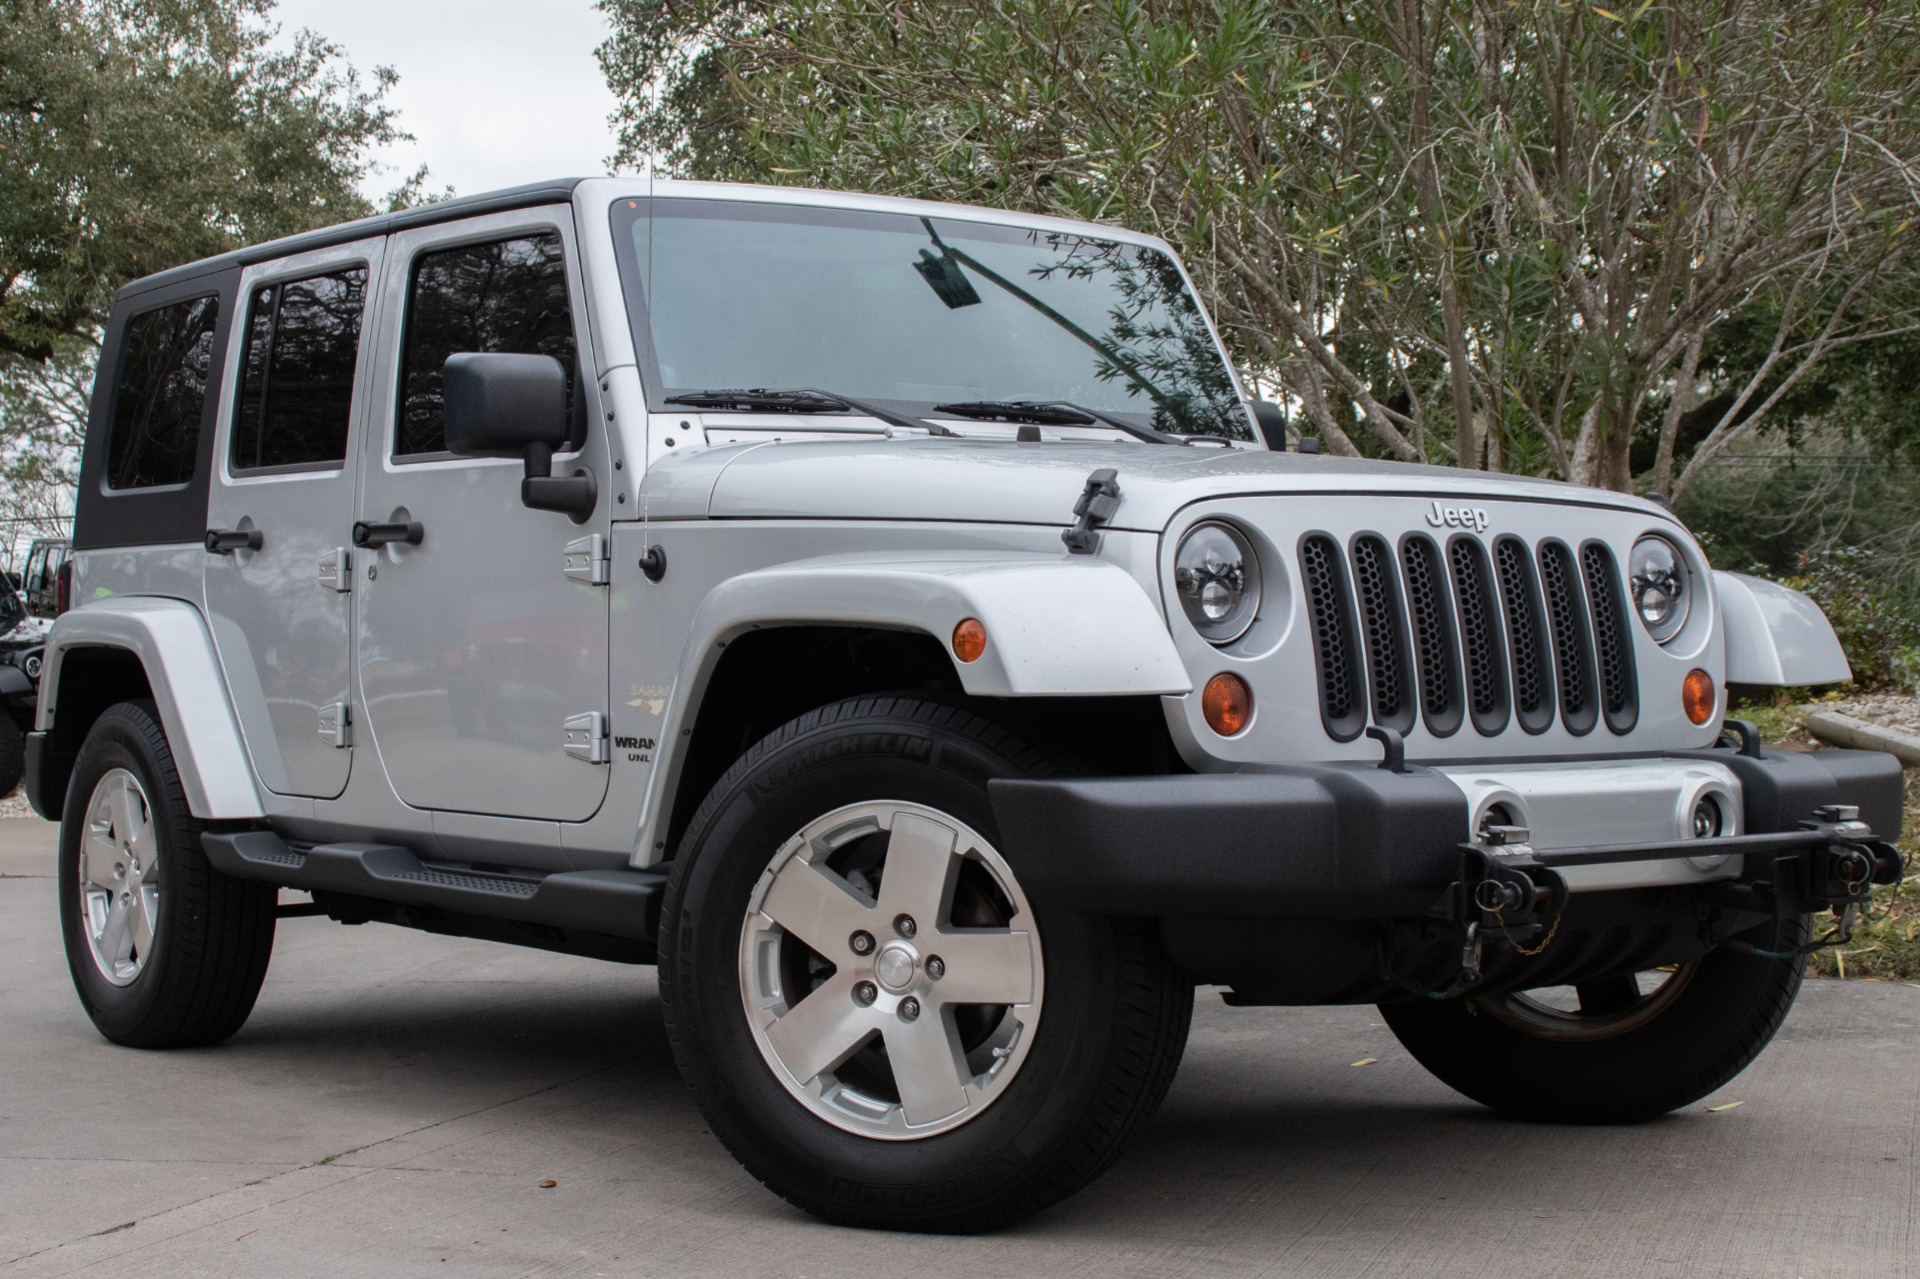 Used 2009 Jeep Wrangler Unlimited Sahara For Sale 22 995